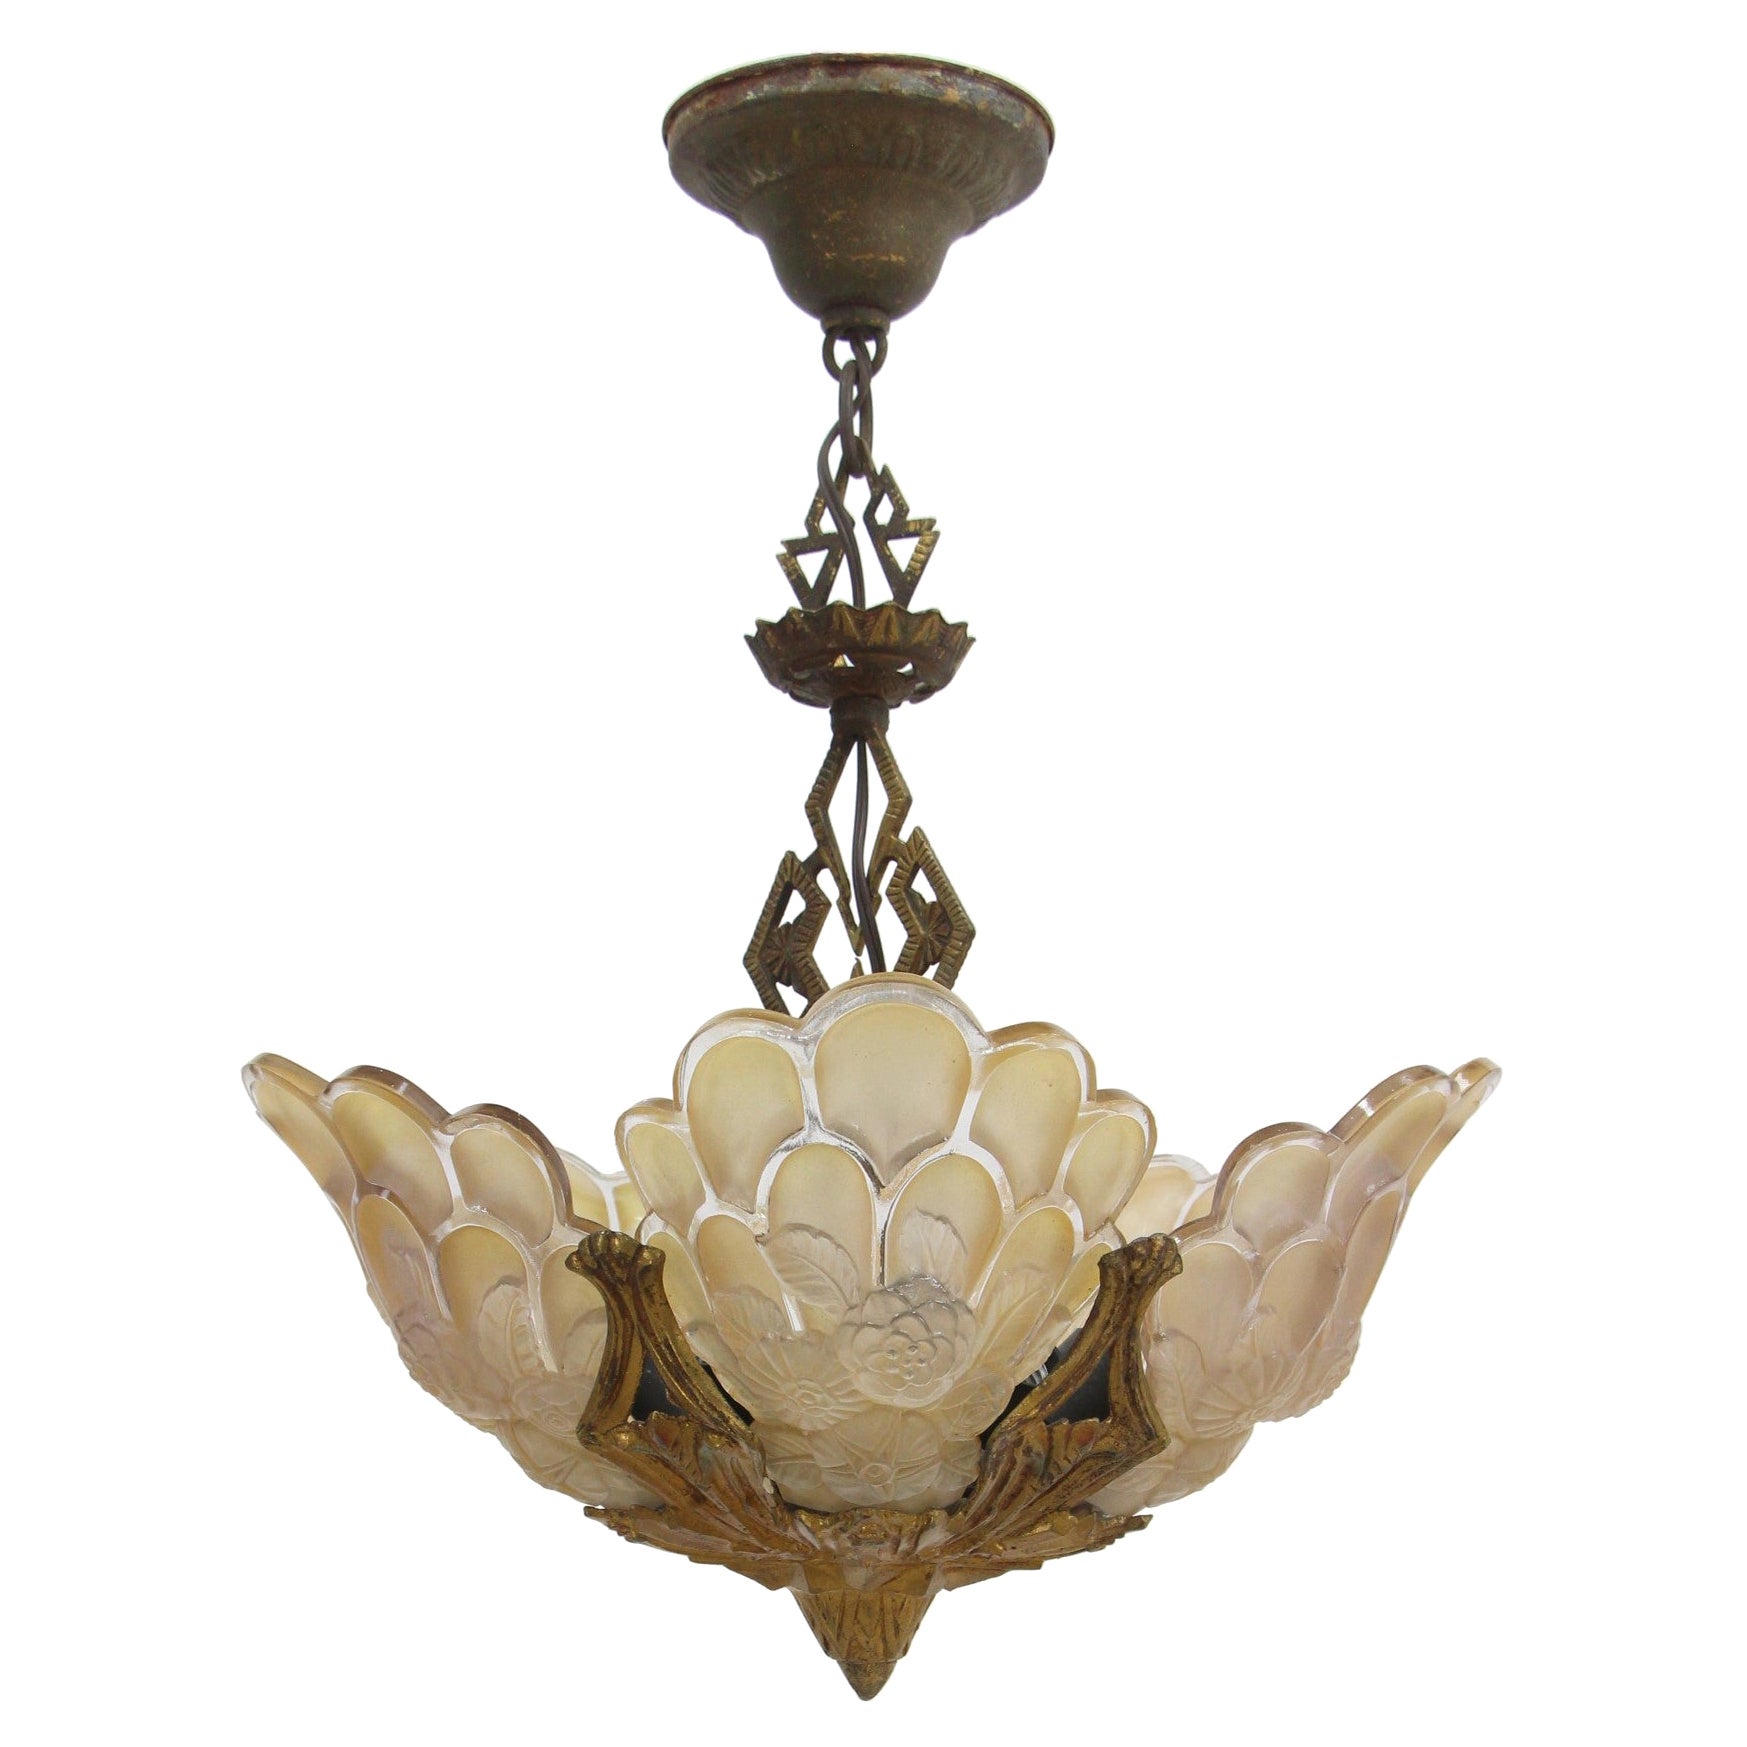 1930s Art Deco Floral Slip Shade Chandelier with 5 Lights